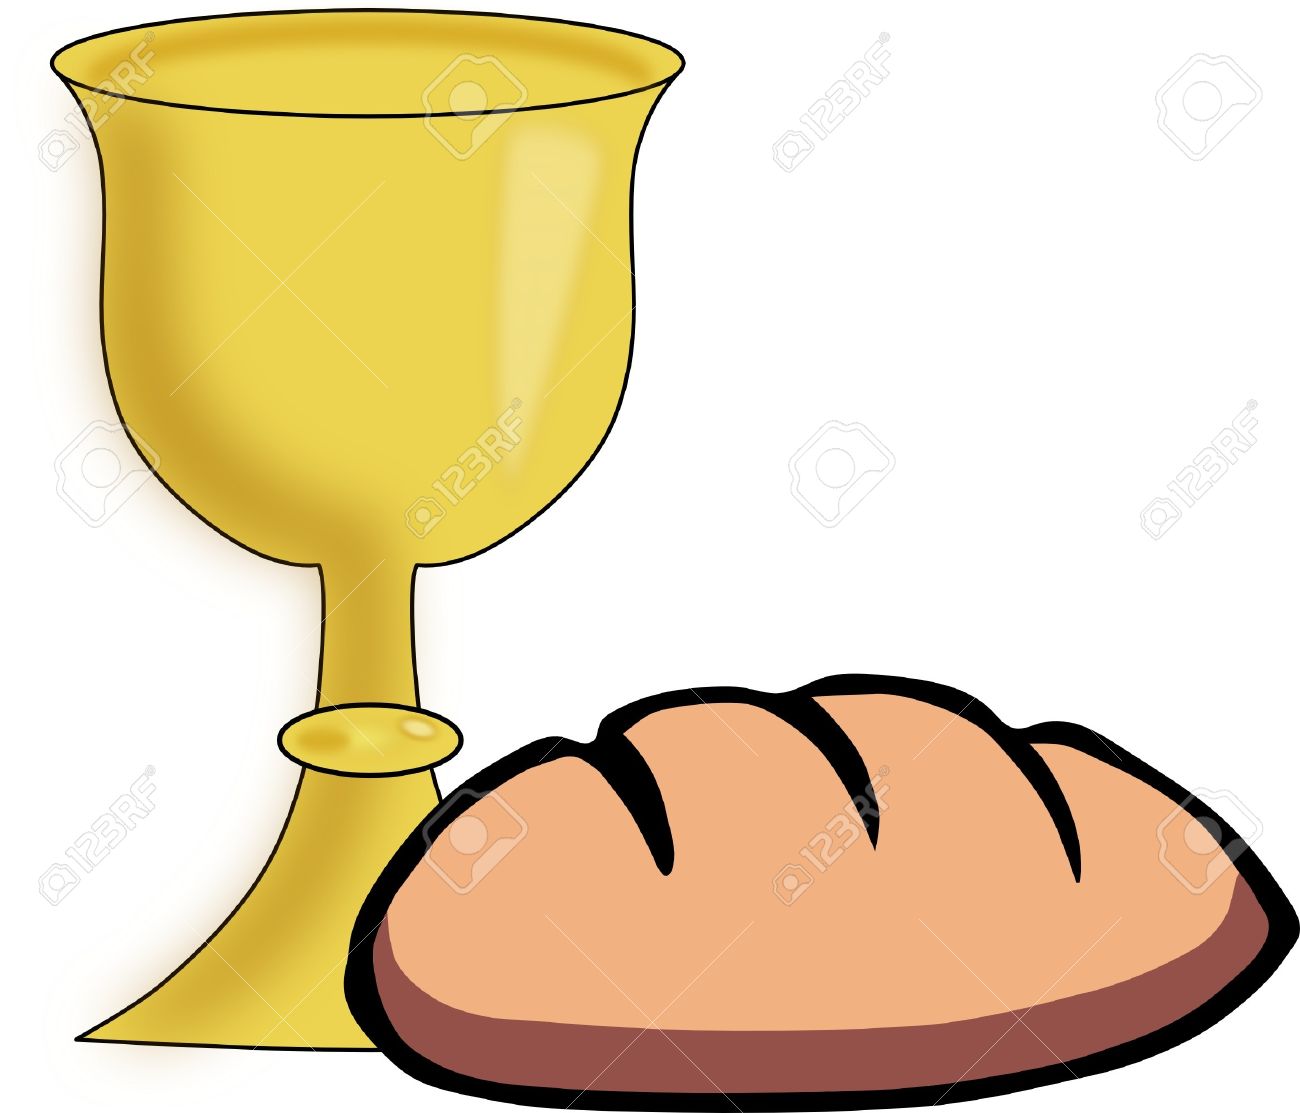 chalice clipart animated